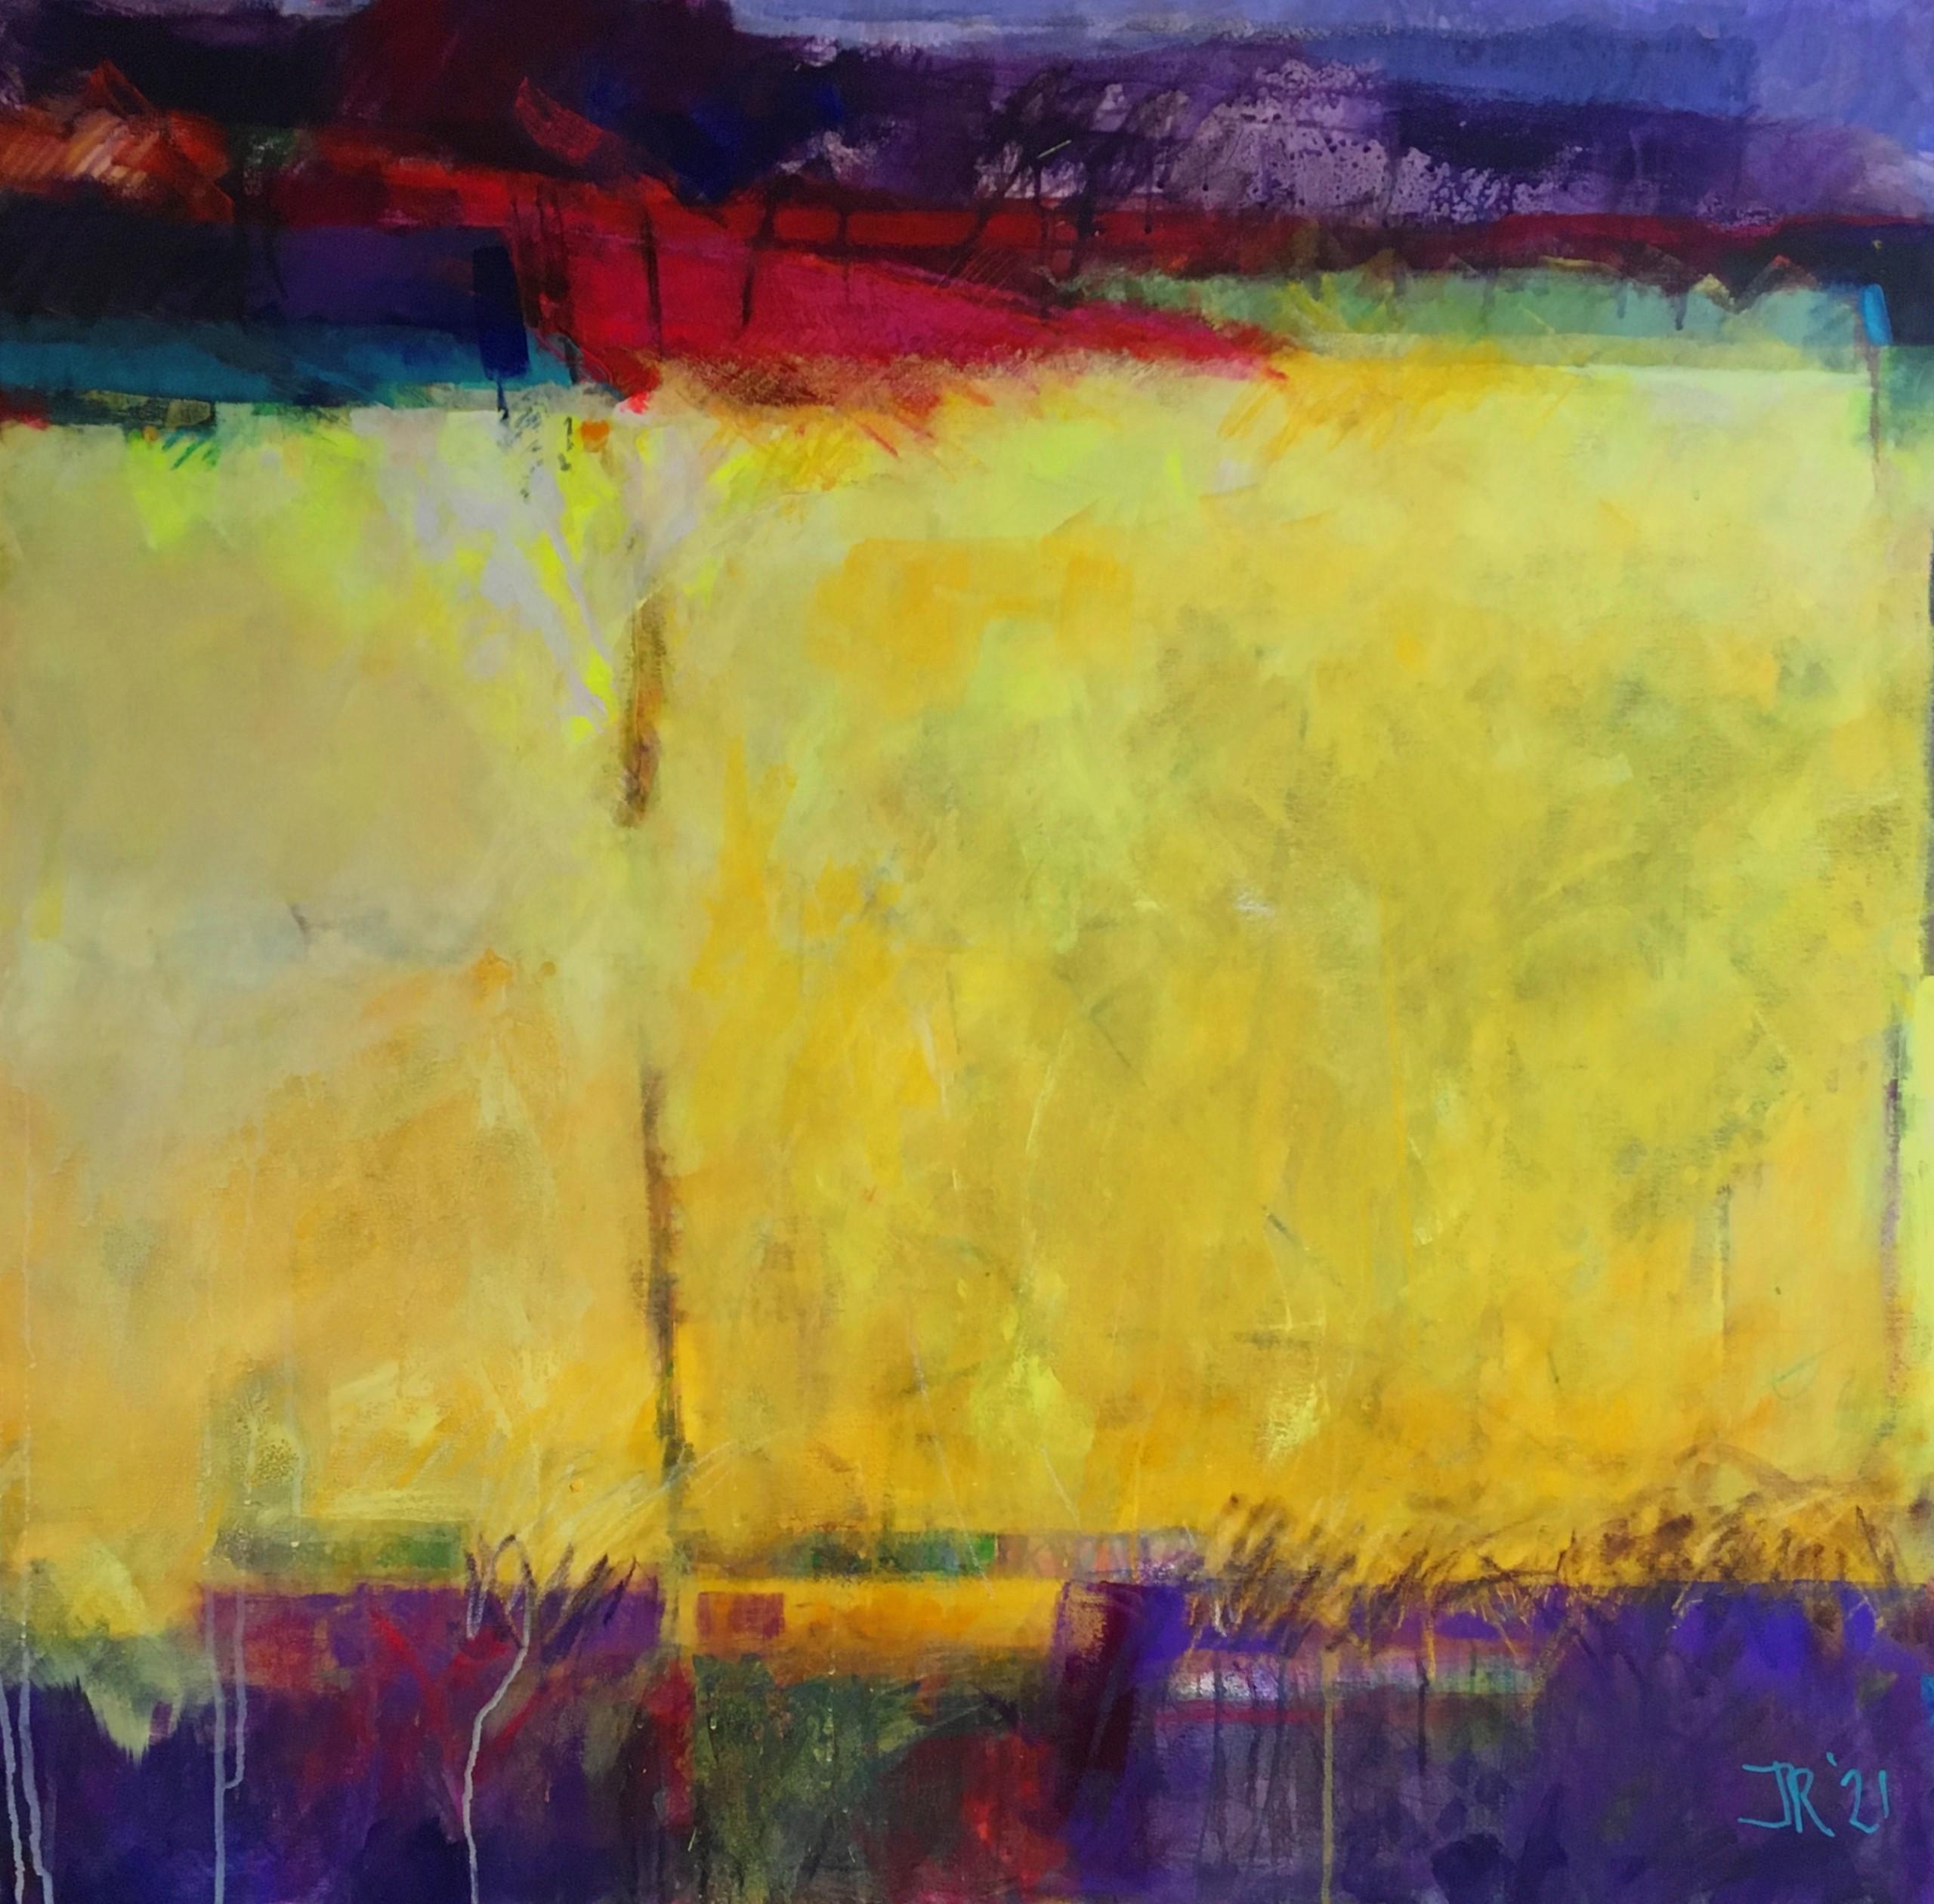 Jon Rowland  Landscape Painting - Burned Gold was the Colour, Abstract expressionist, Bright Bold Statement Art 